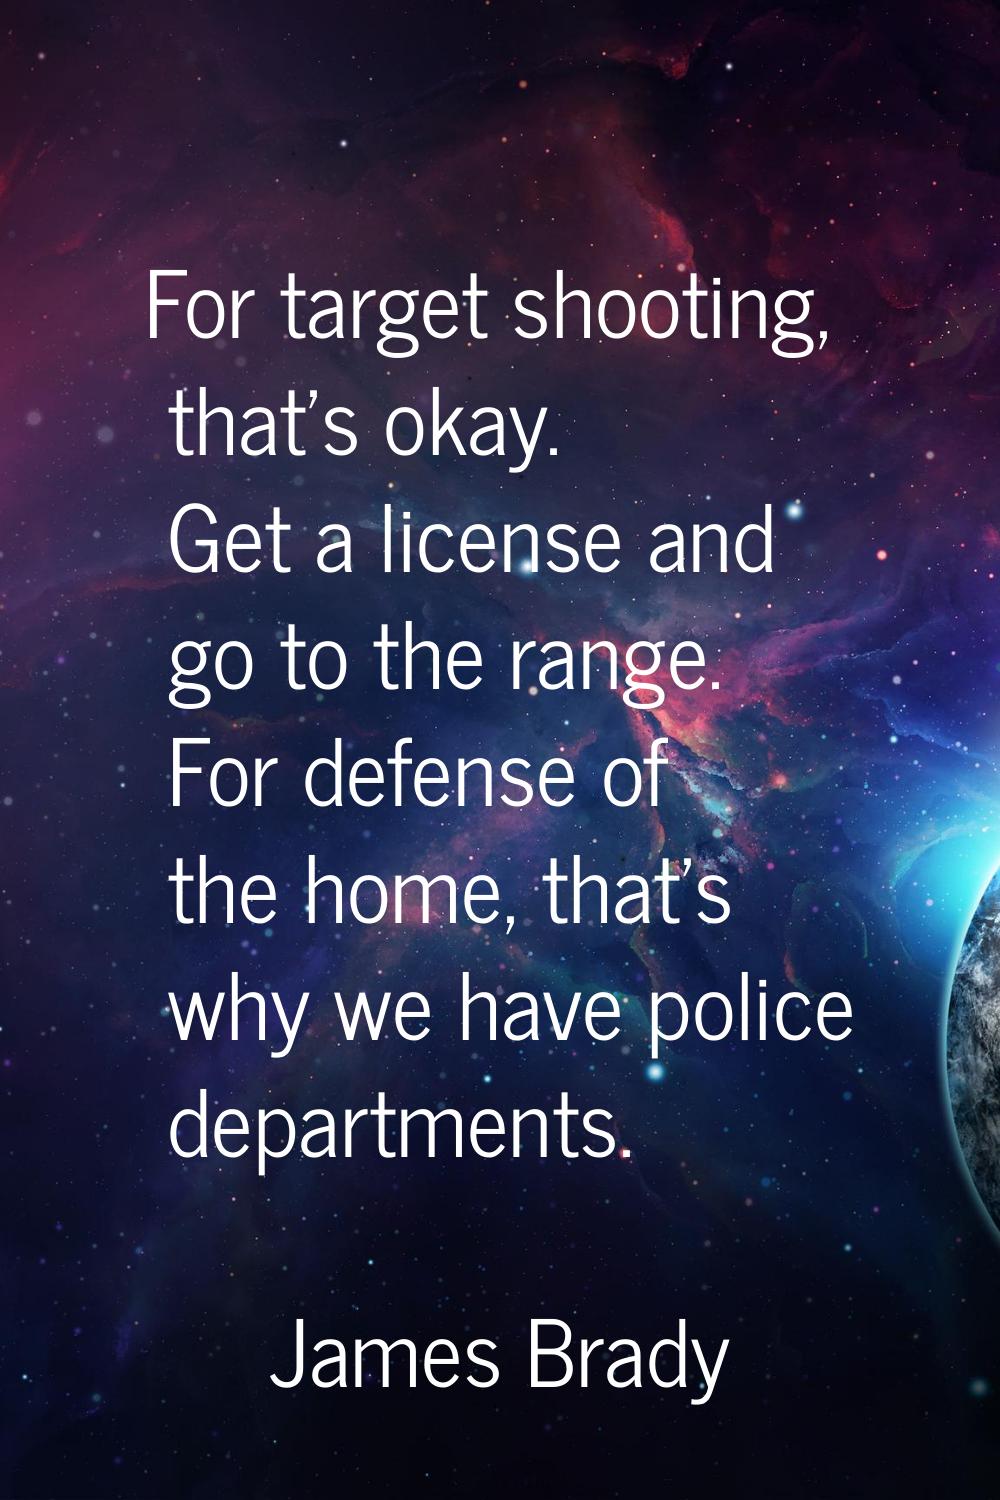 For target shooting, that's okay. Get a license and go to the range. For defense of the home, that'